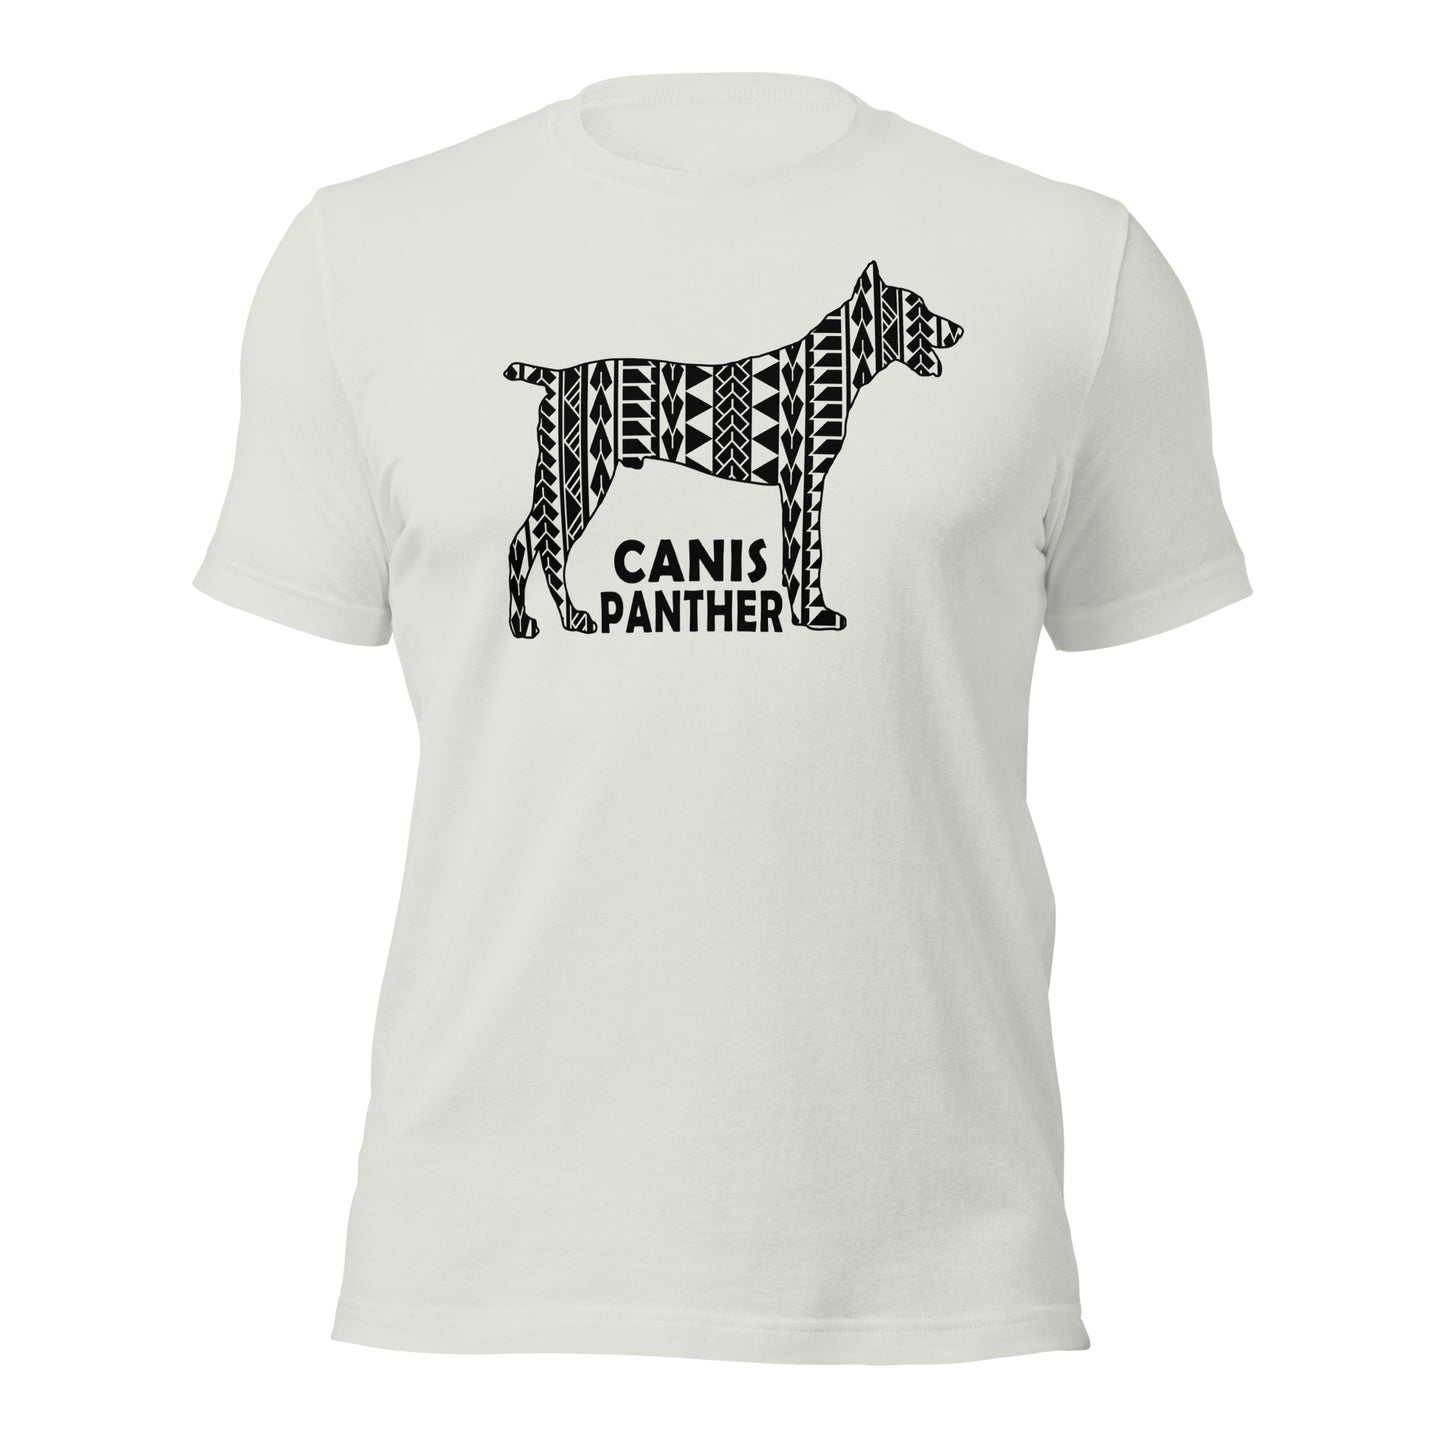 Canis Panther Polynesian t-shirt silver by Dog Artistry.